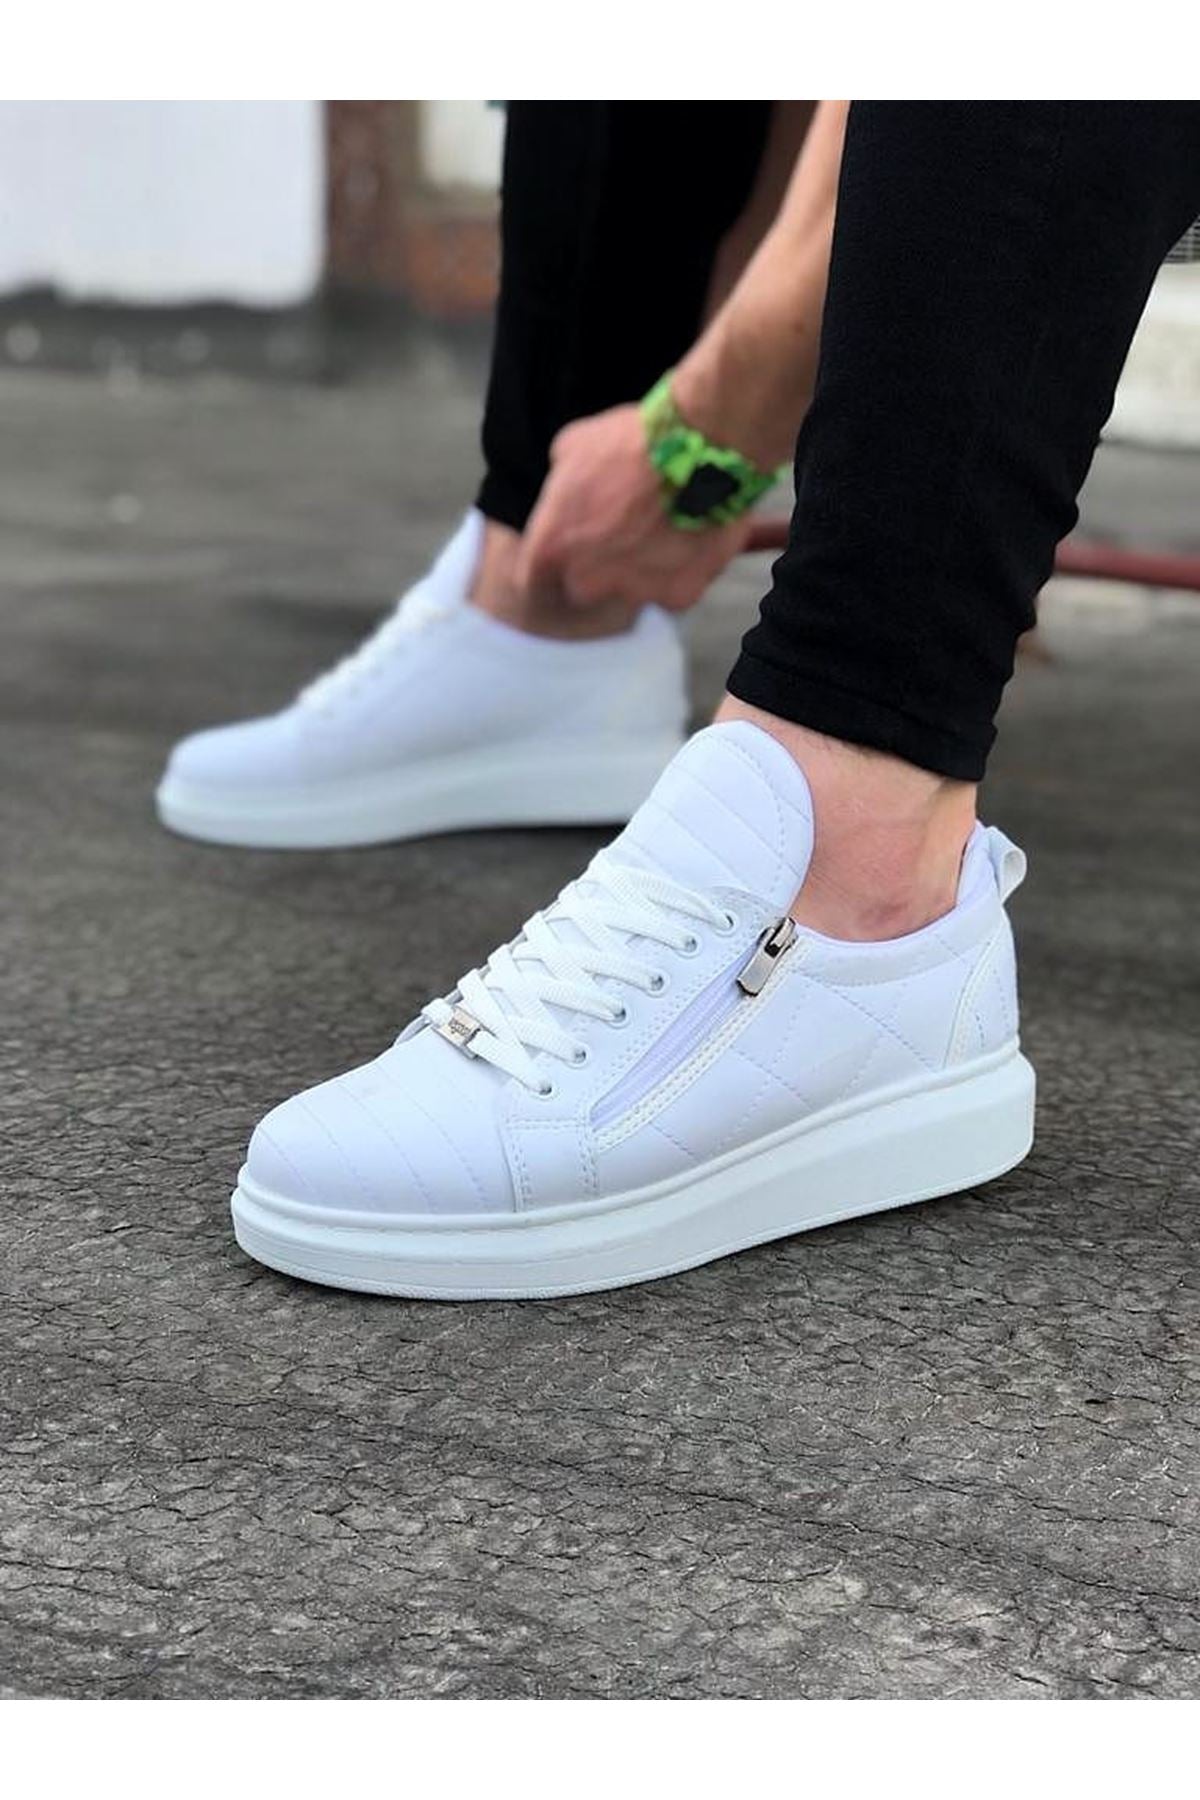 WG502 White Men's Casual Shoes - STREETMODE ™